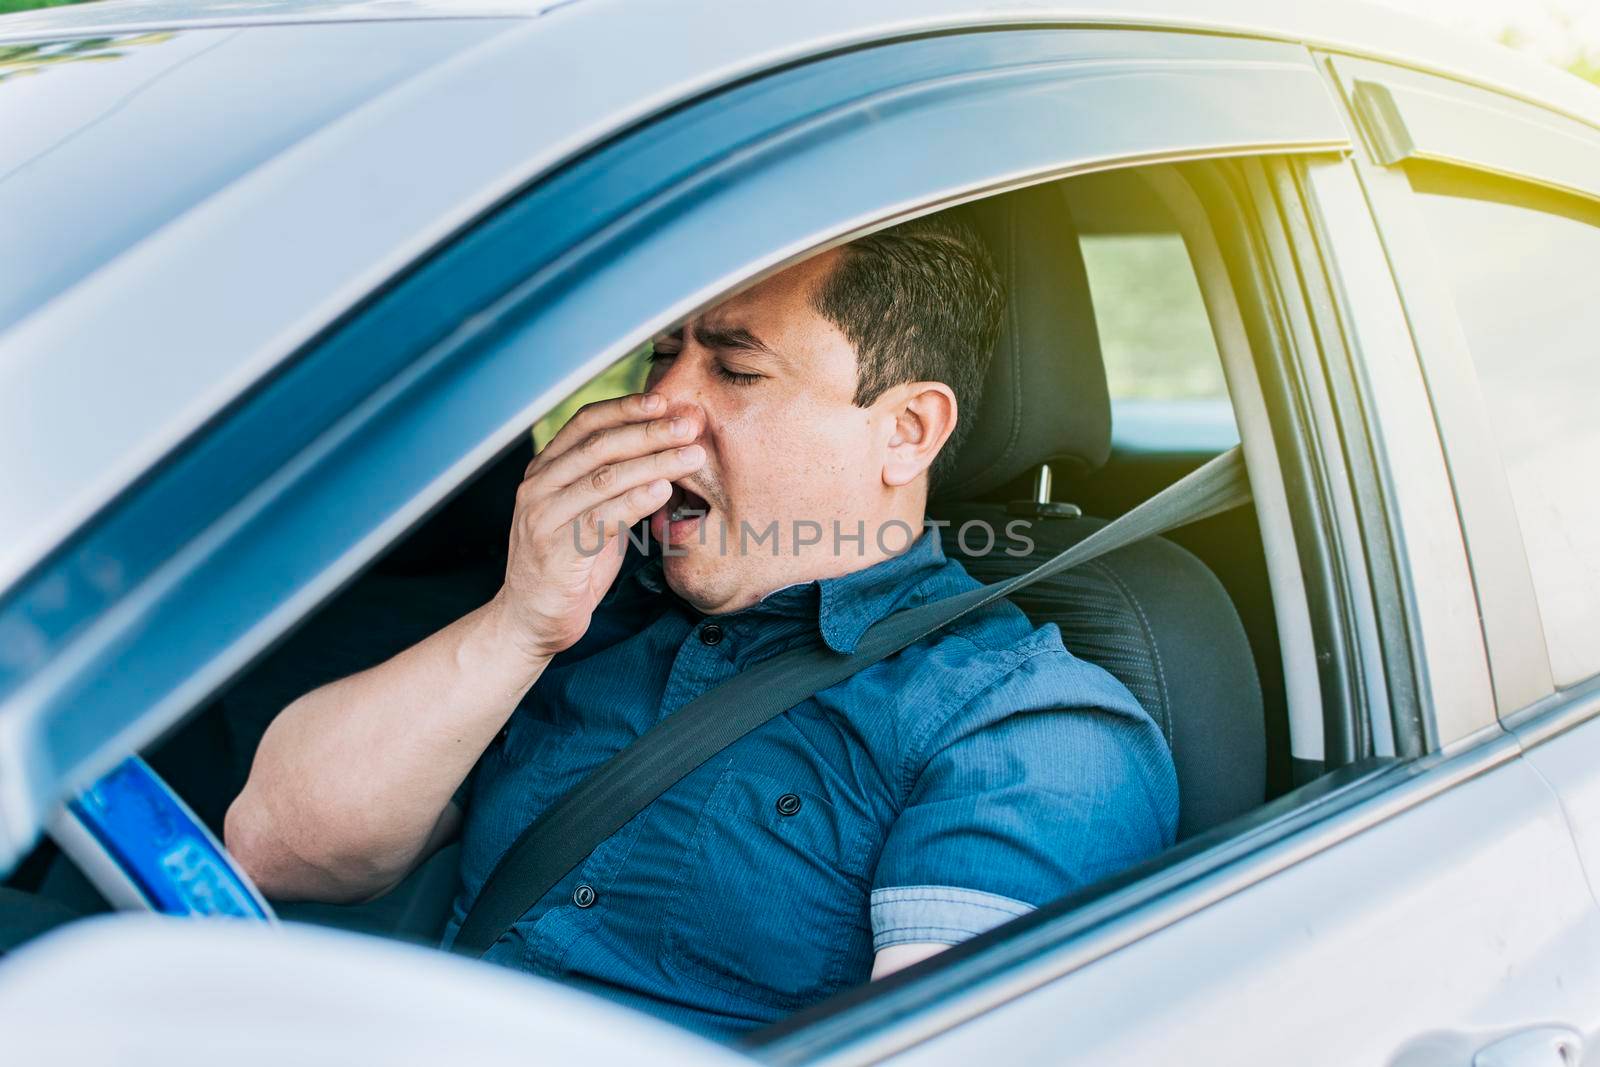 A sleepy driver at the wheel, a tired person while driving, Tired driver yawning, concept of man yawning while driving